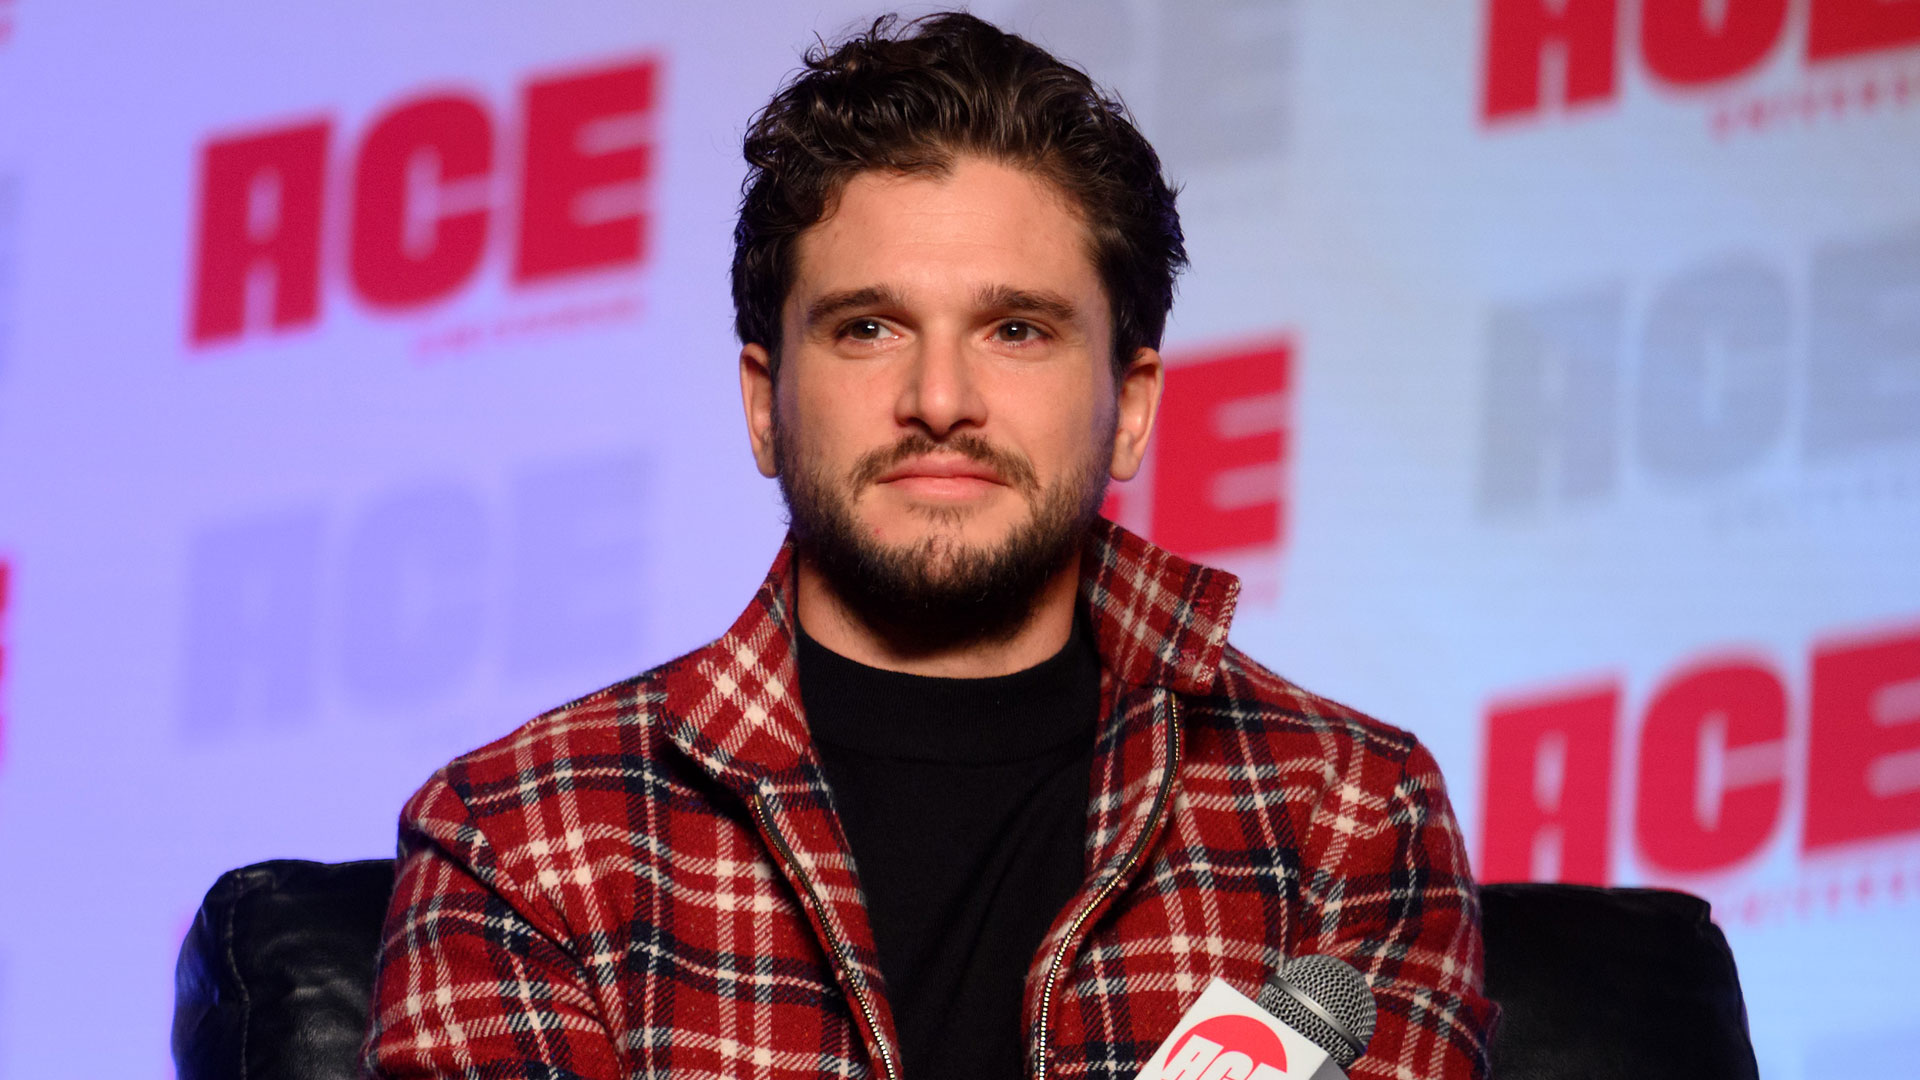 Kit Harington Says the ‘Game of Thrones’ Moment He Thinks Back to Most Came During a Bathroom Break